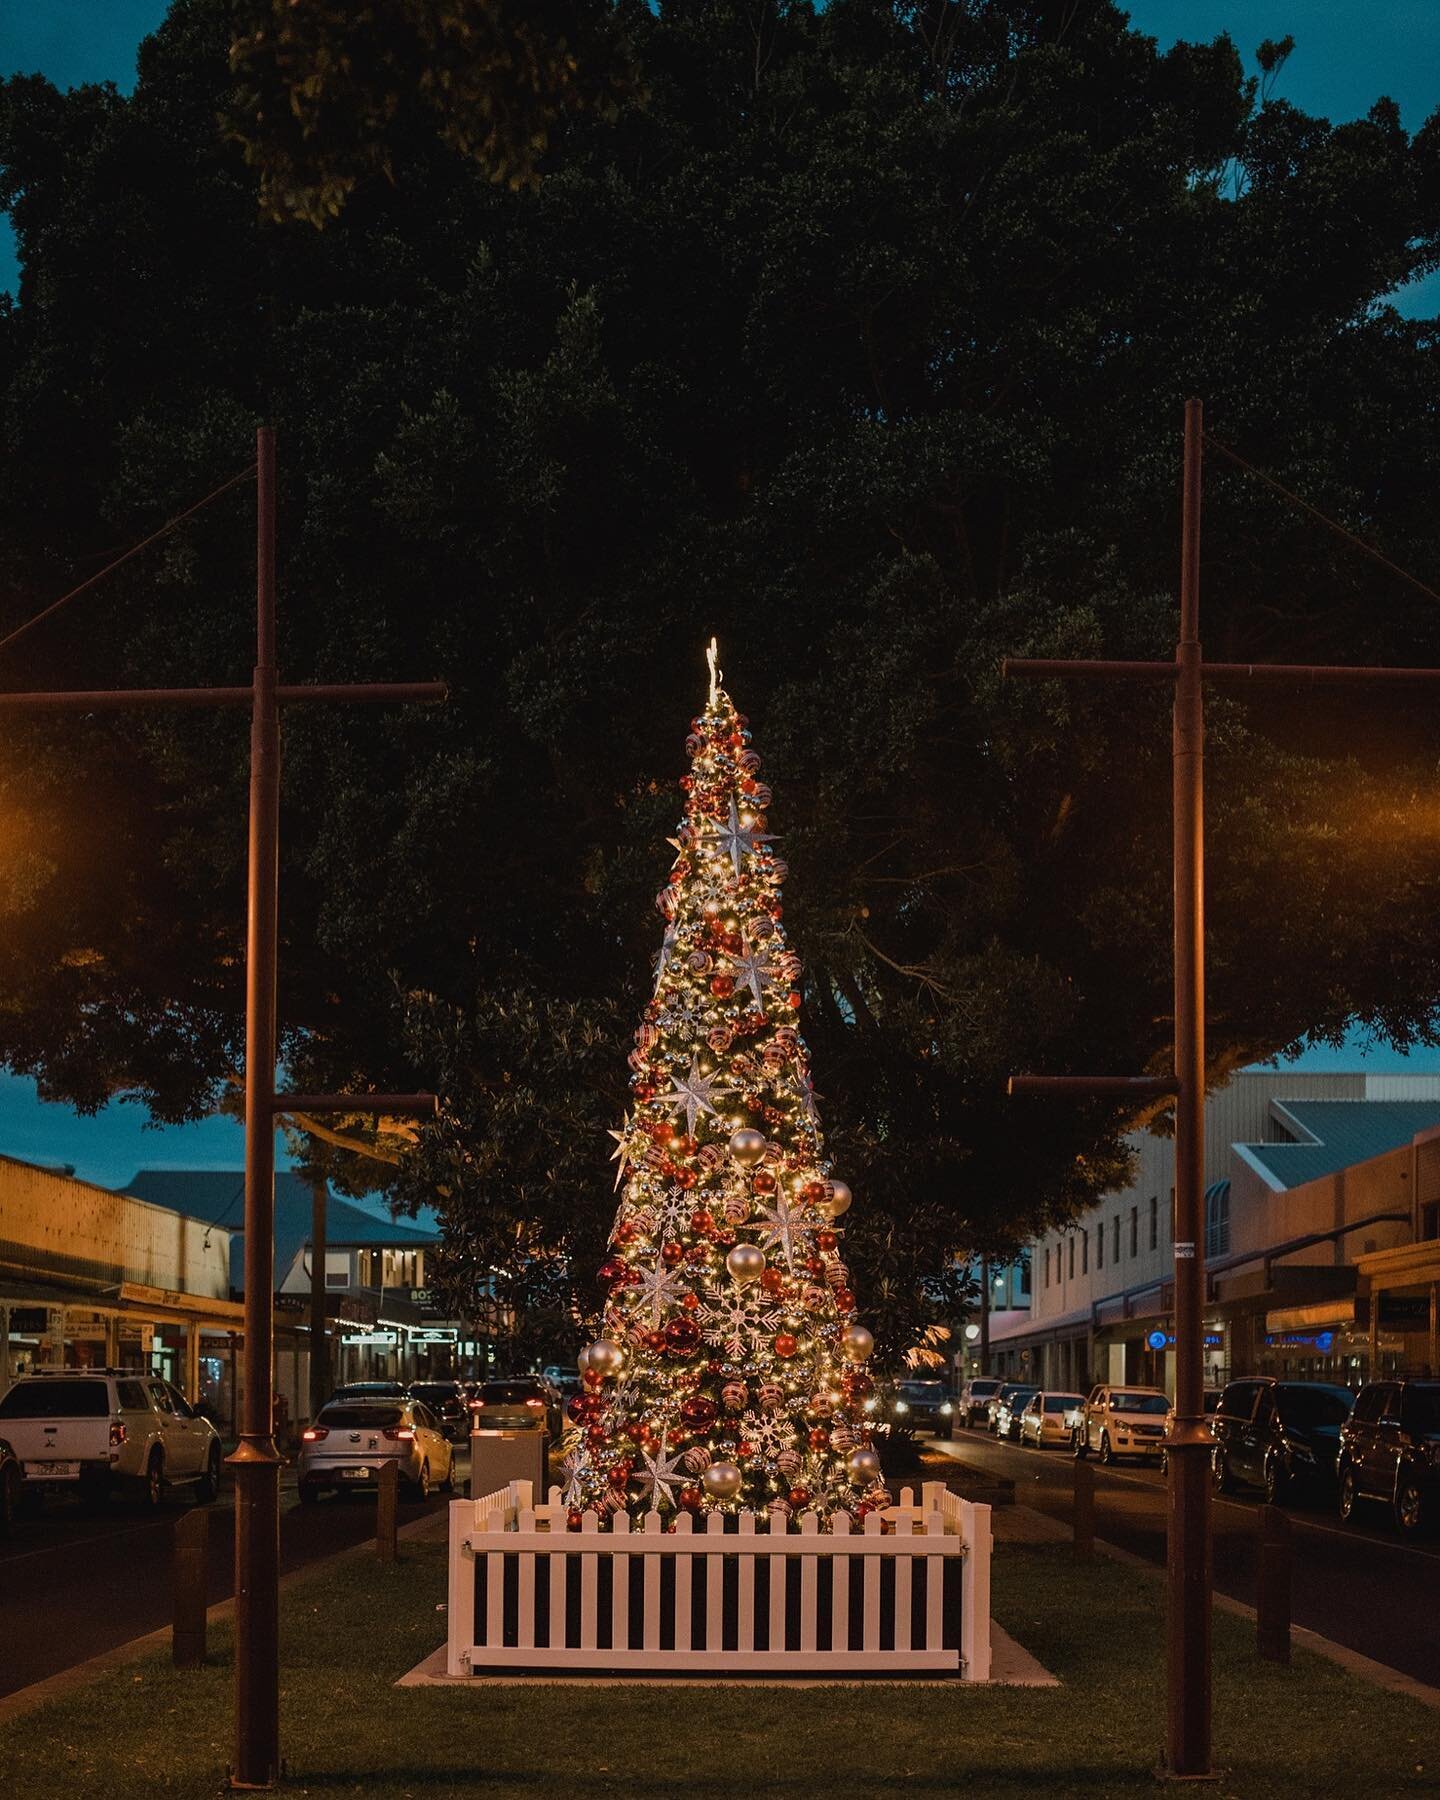 We are already feeling festive on First Ave &amp; there&rsquo;s nothing like a ginormous Christmas tree to help you feel it too. Christmas is coming, 2452!! &hellip; #christmas2021 #supportlocal #eatdrinkcoffscoast #sawtellcafe